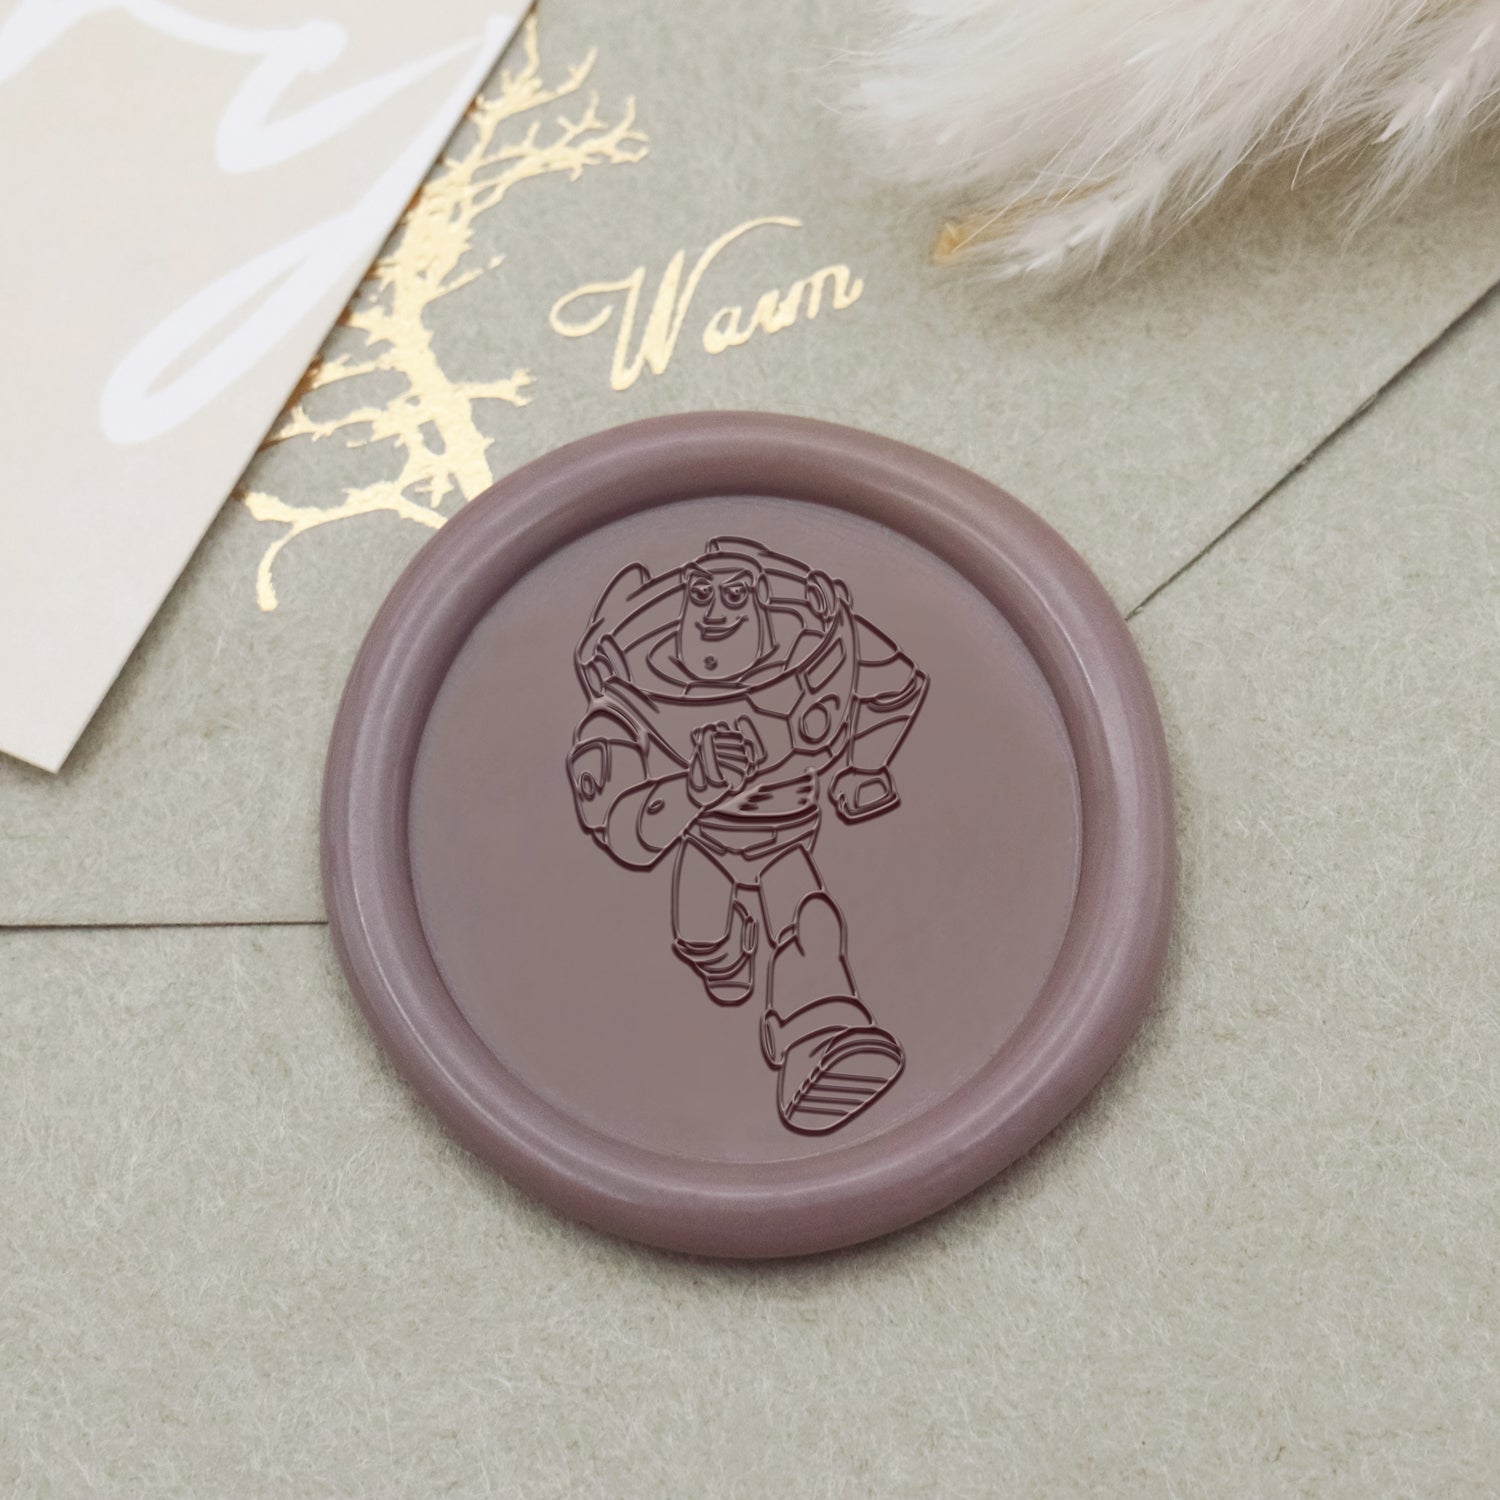 Animated Film Fairytale Character Wax Seal Stamp - 21 1